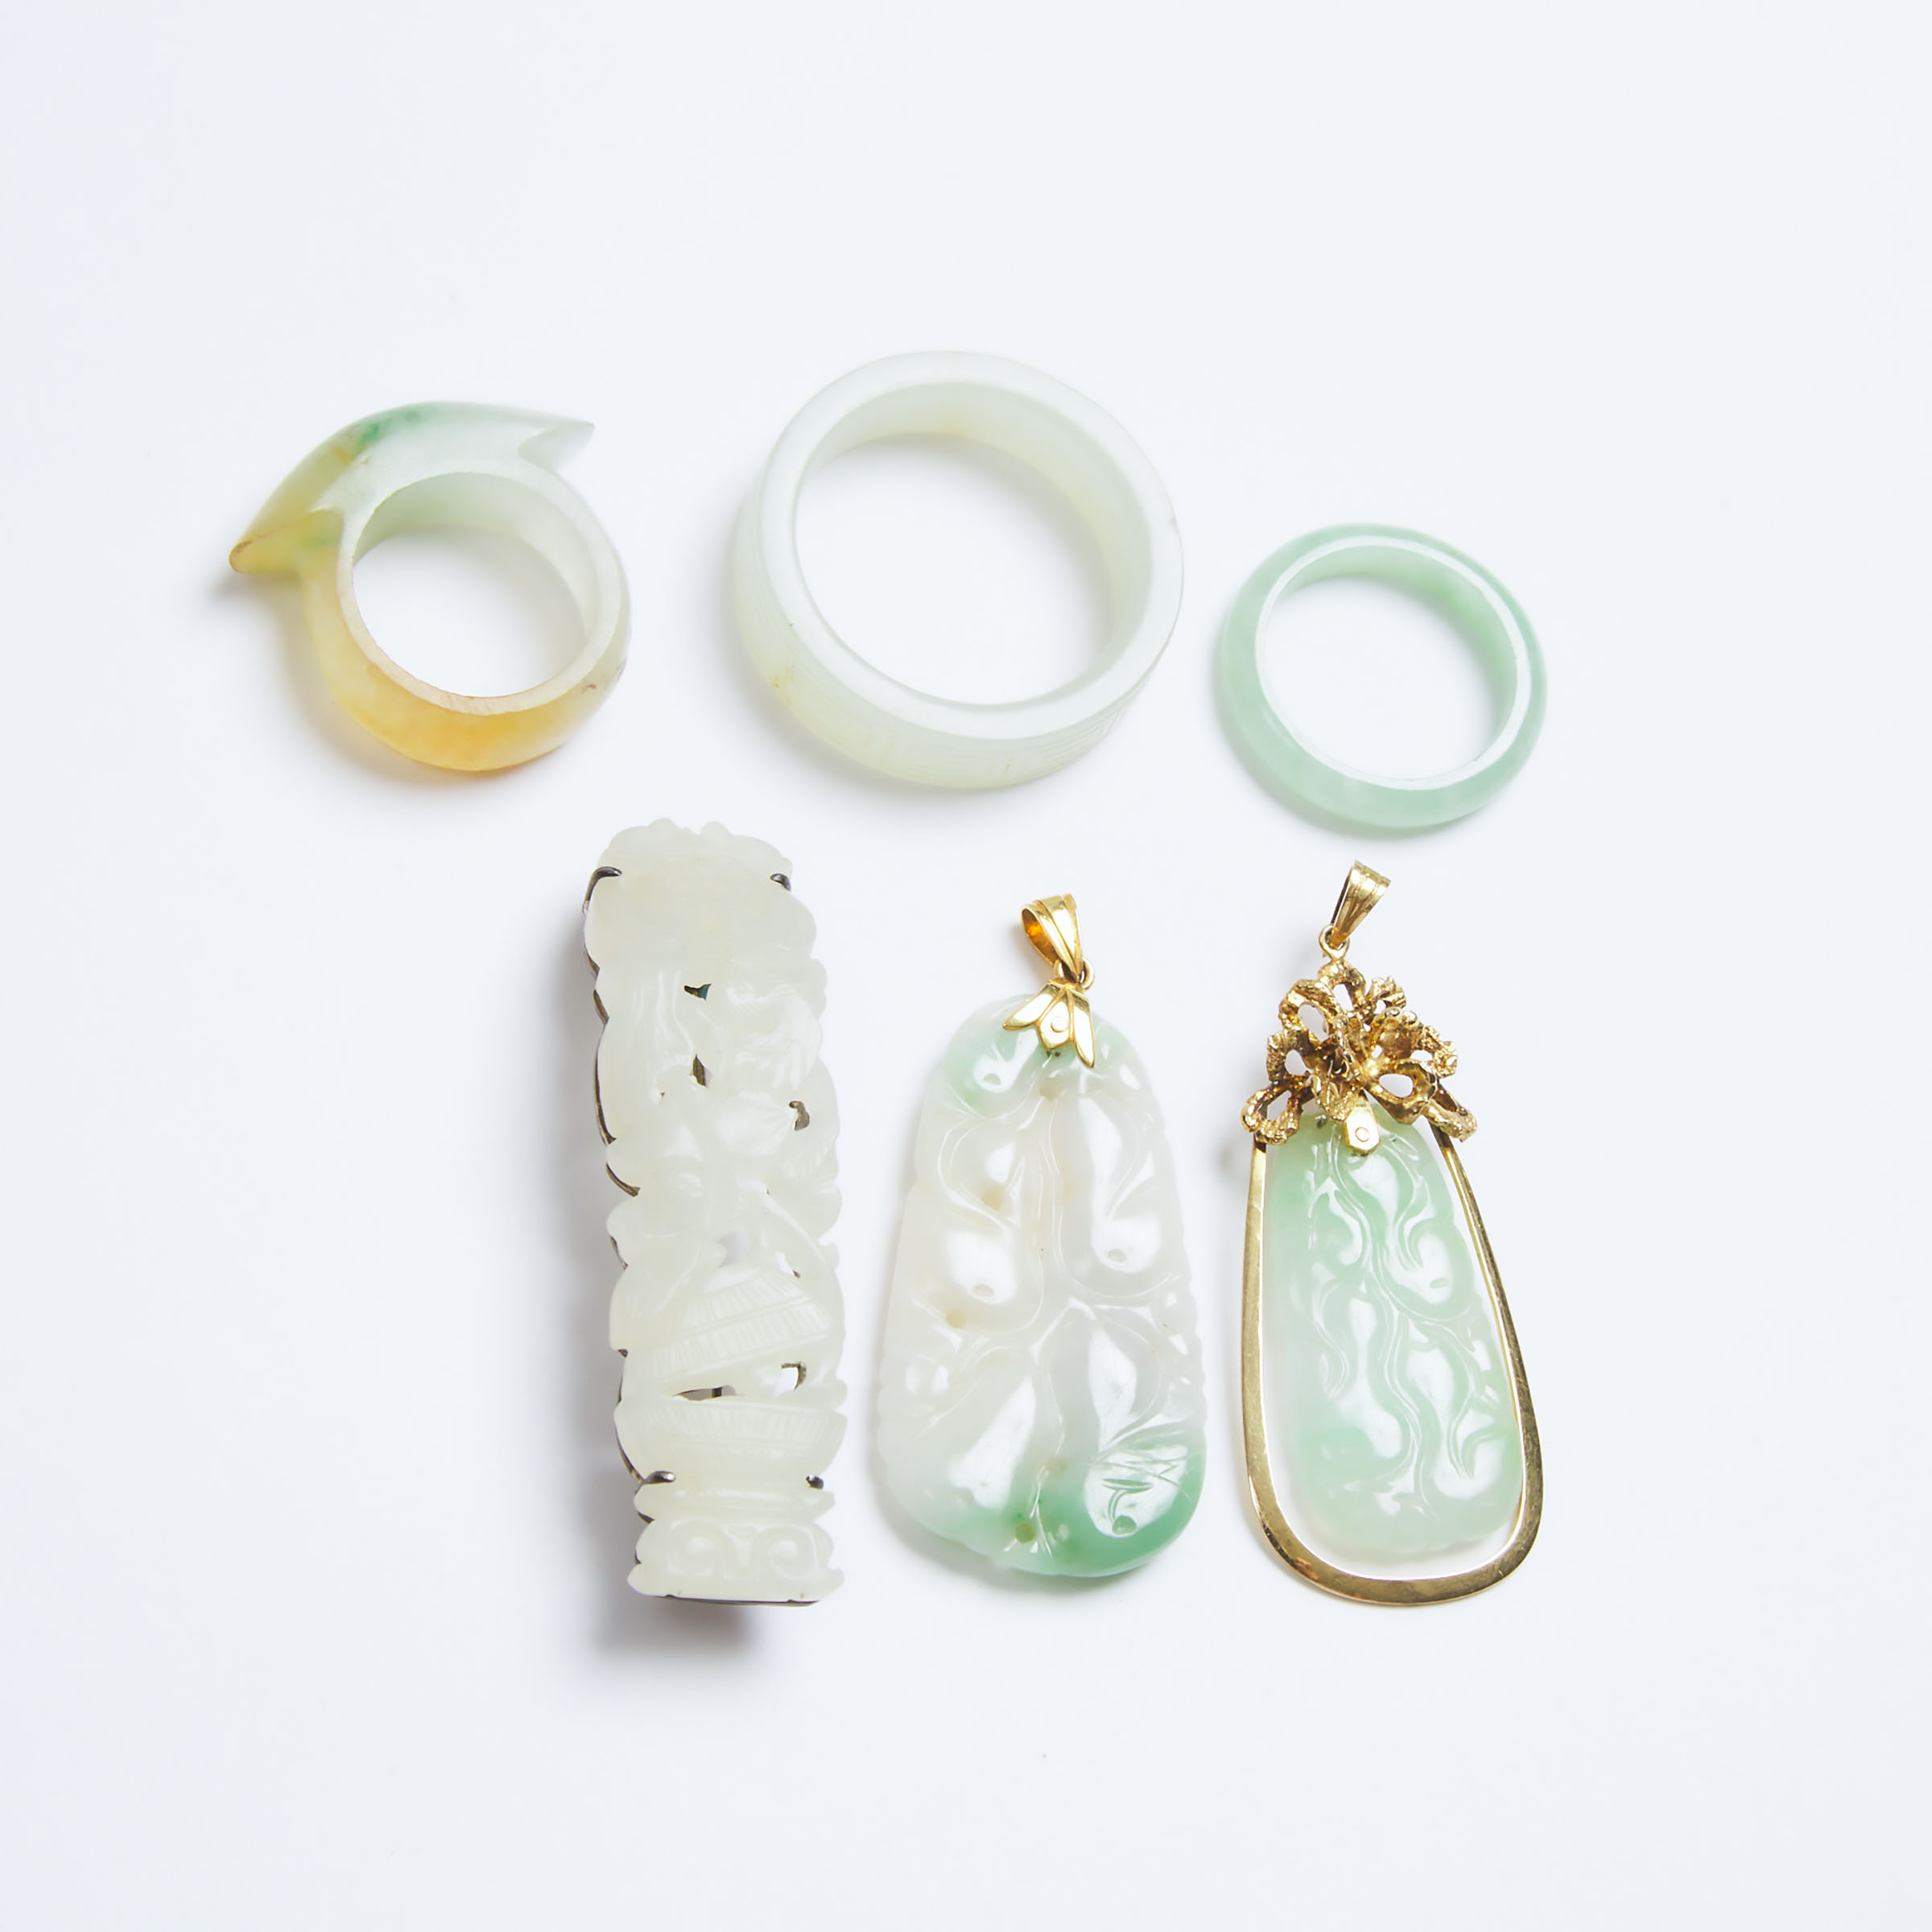 A Group of Six White Jade and Jadeite